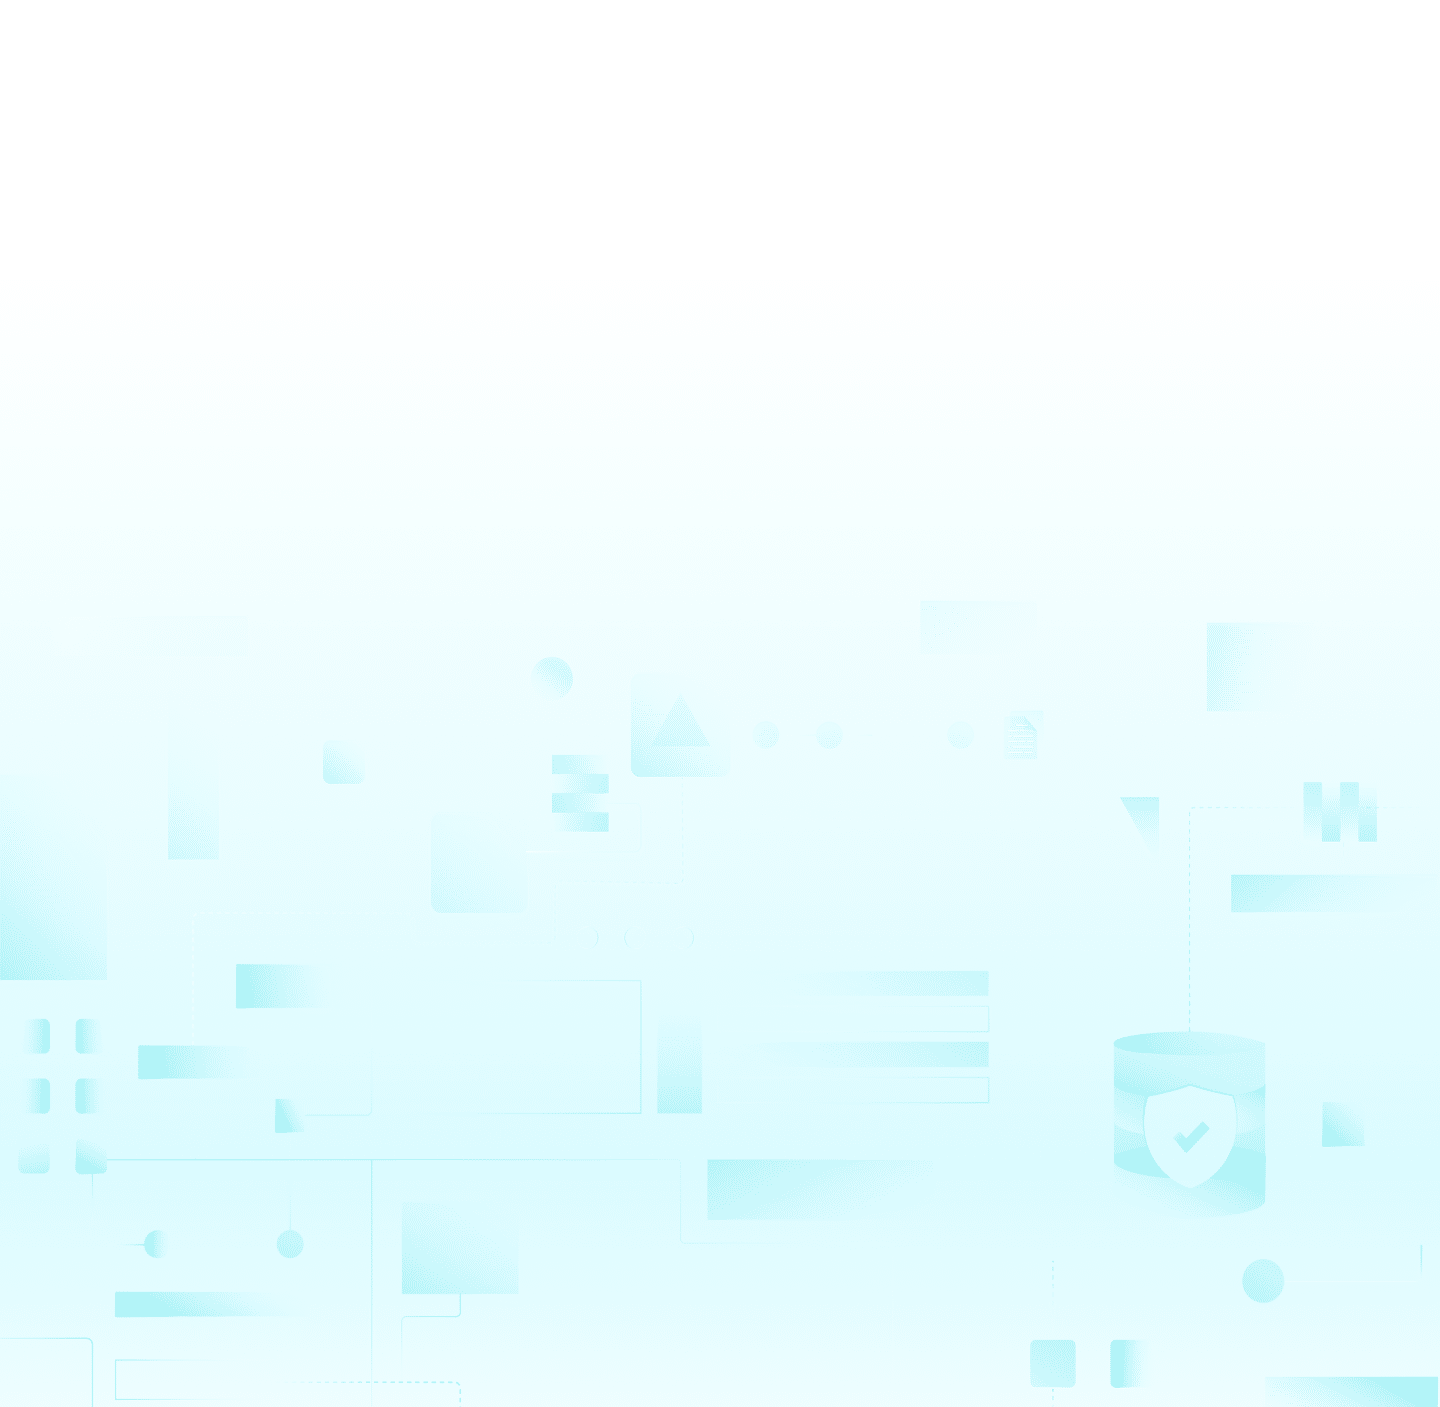 Get Started Background white to blue gradient